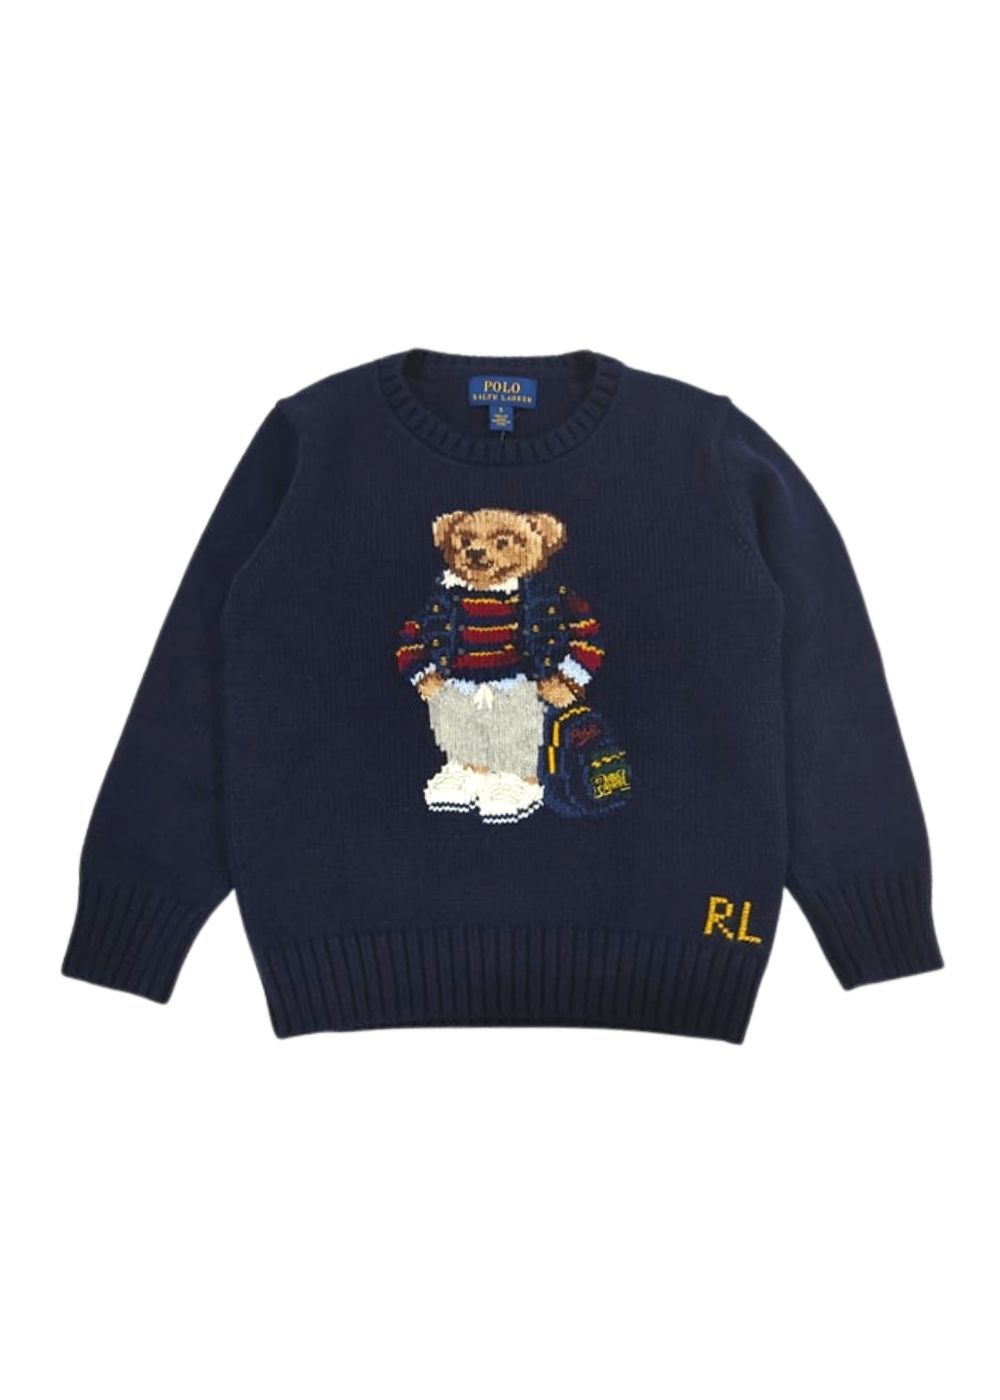 Featured image for “POLO RALPH LAUREN MAGLIONE BEAR”